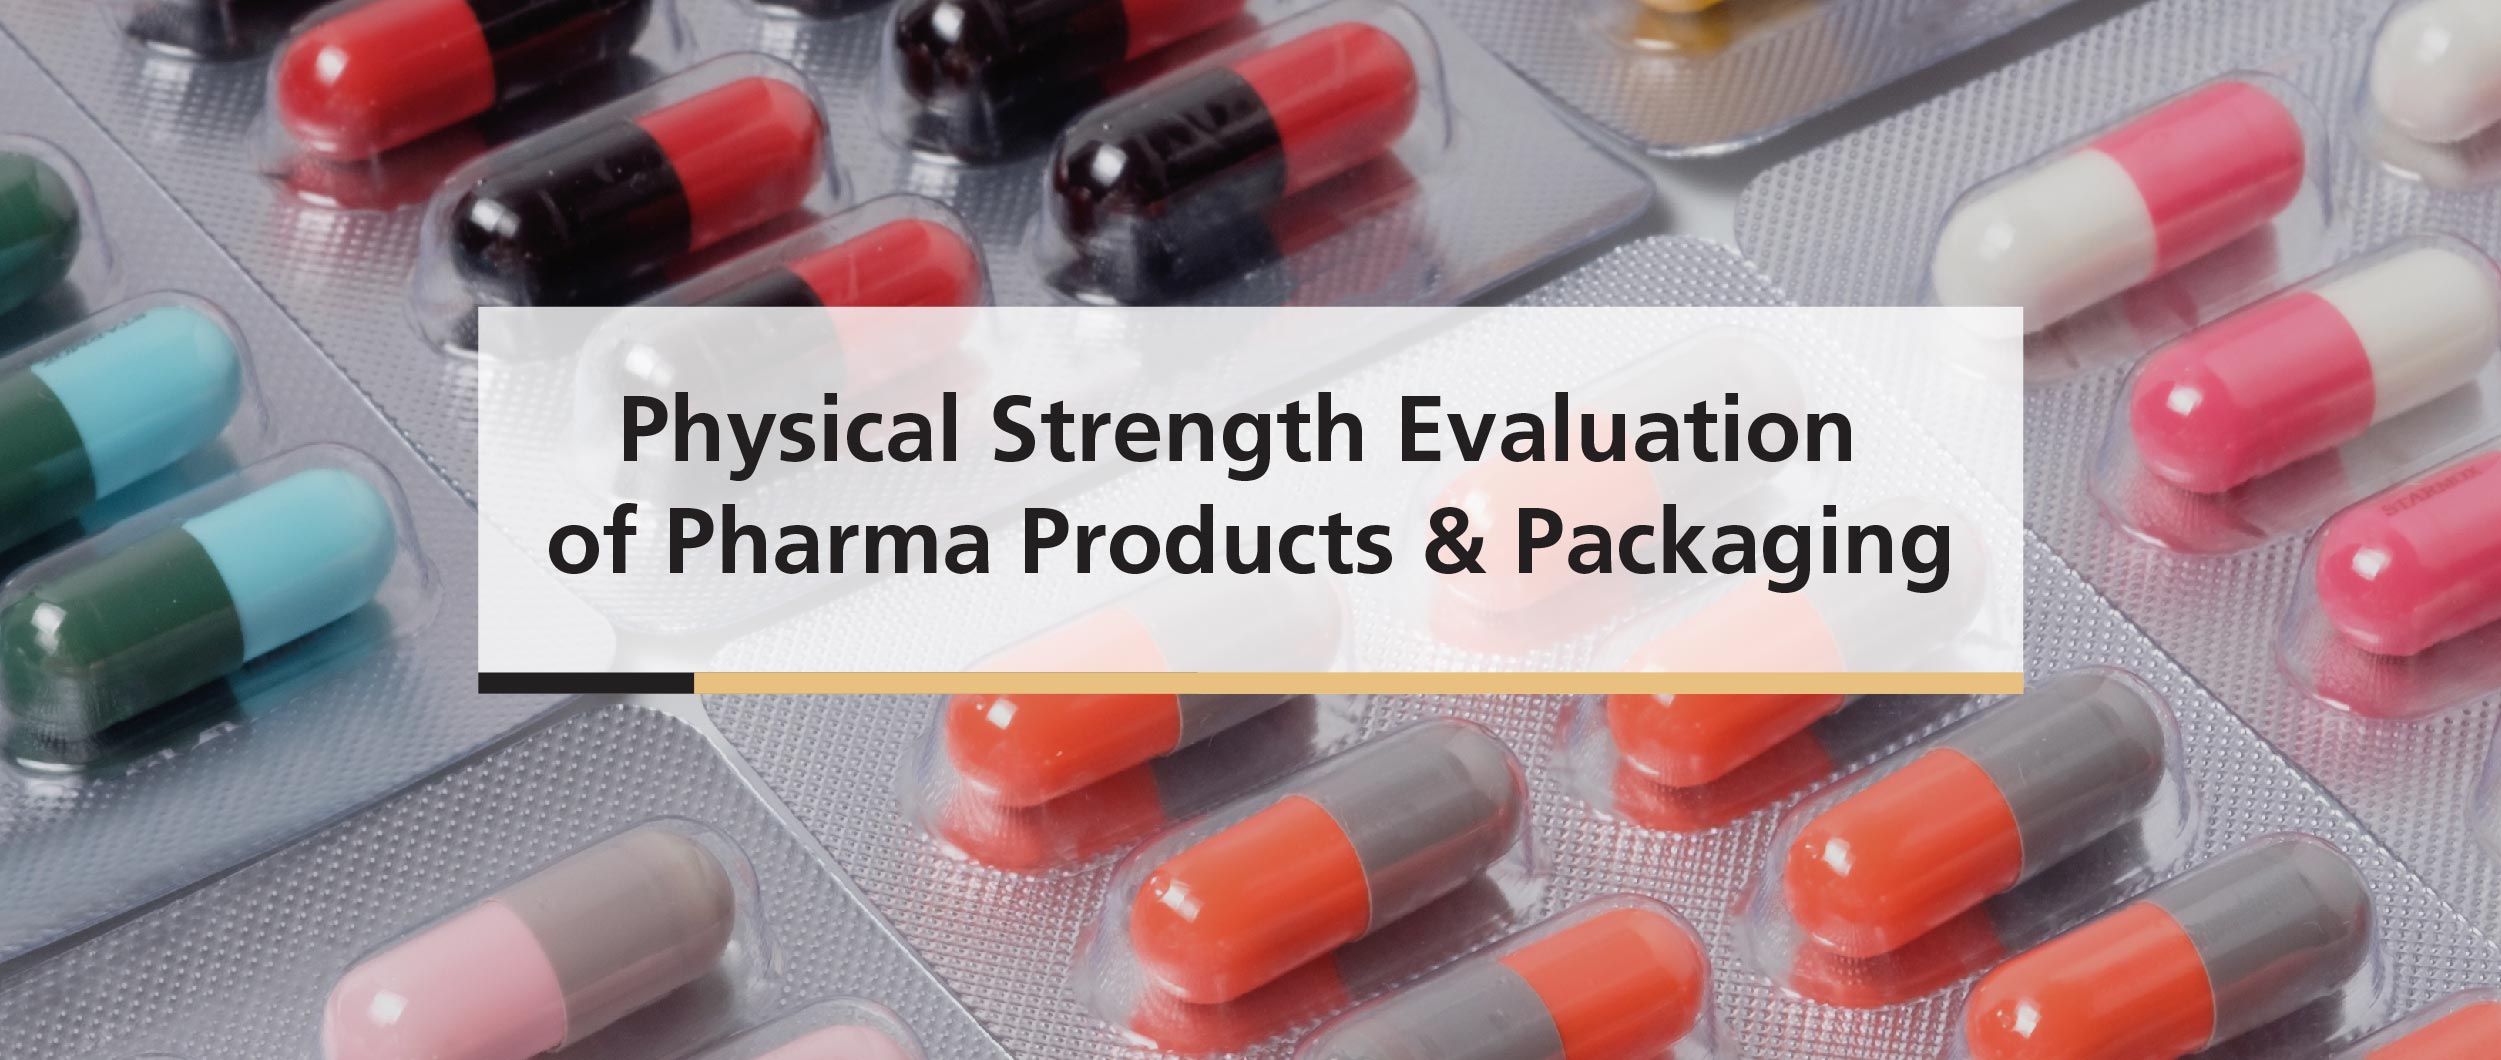 Physical Strength Evaluation of Pharma Products & Packaging